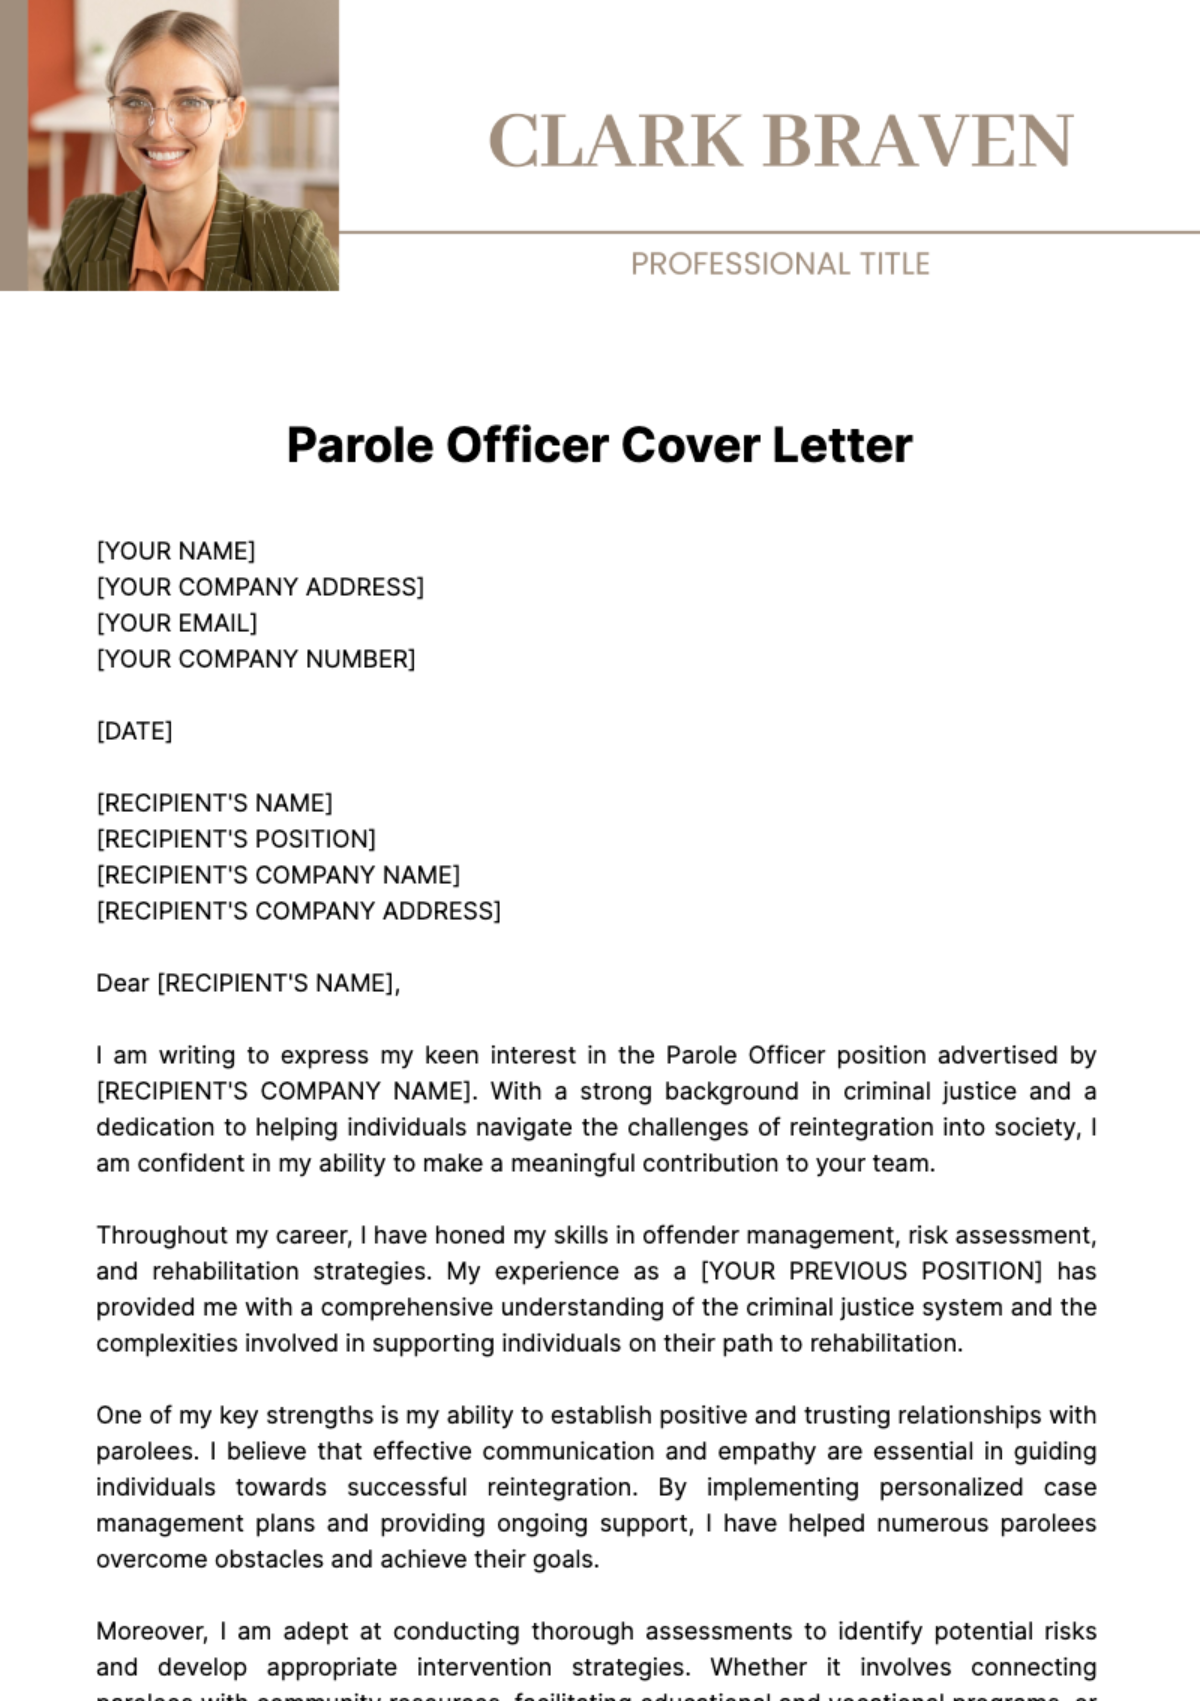 Parole Officer Cover Letter Template